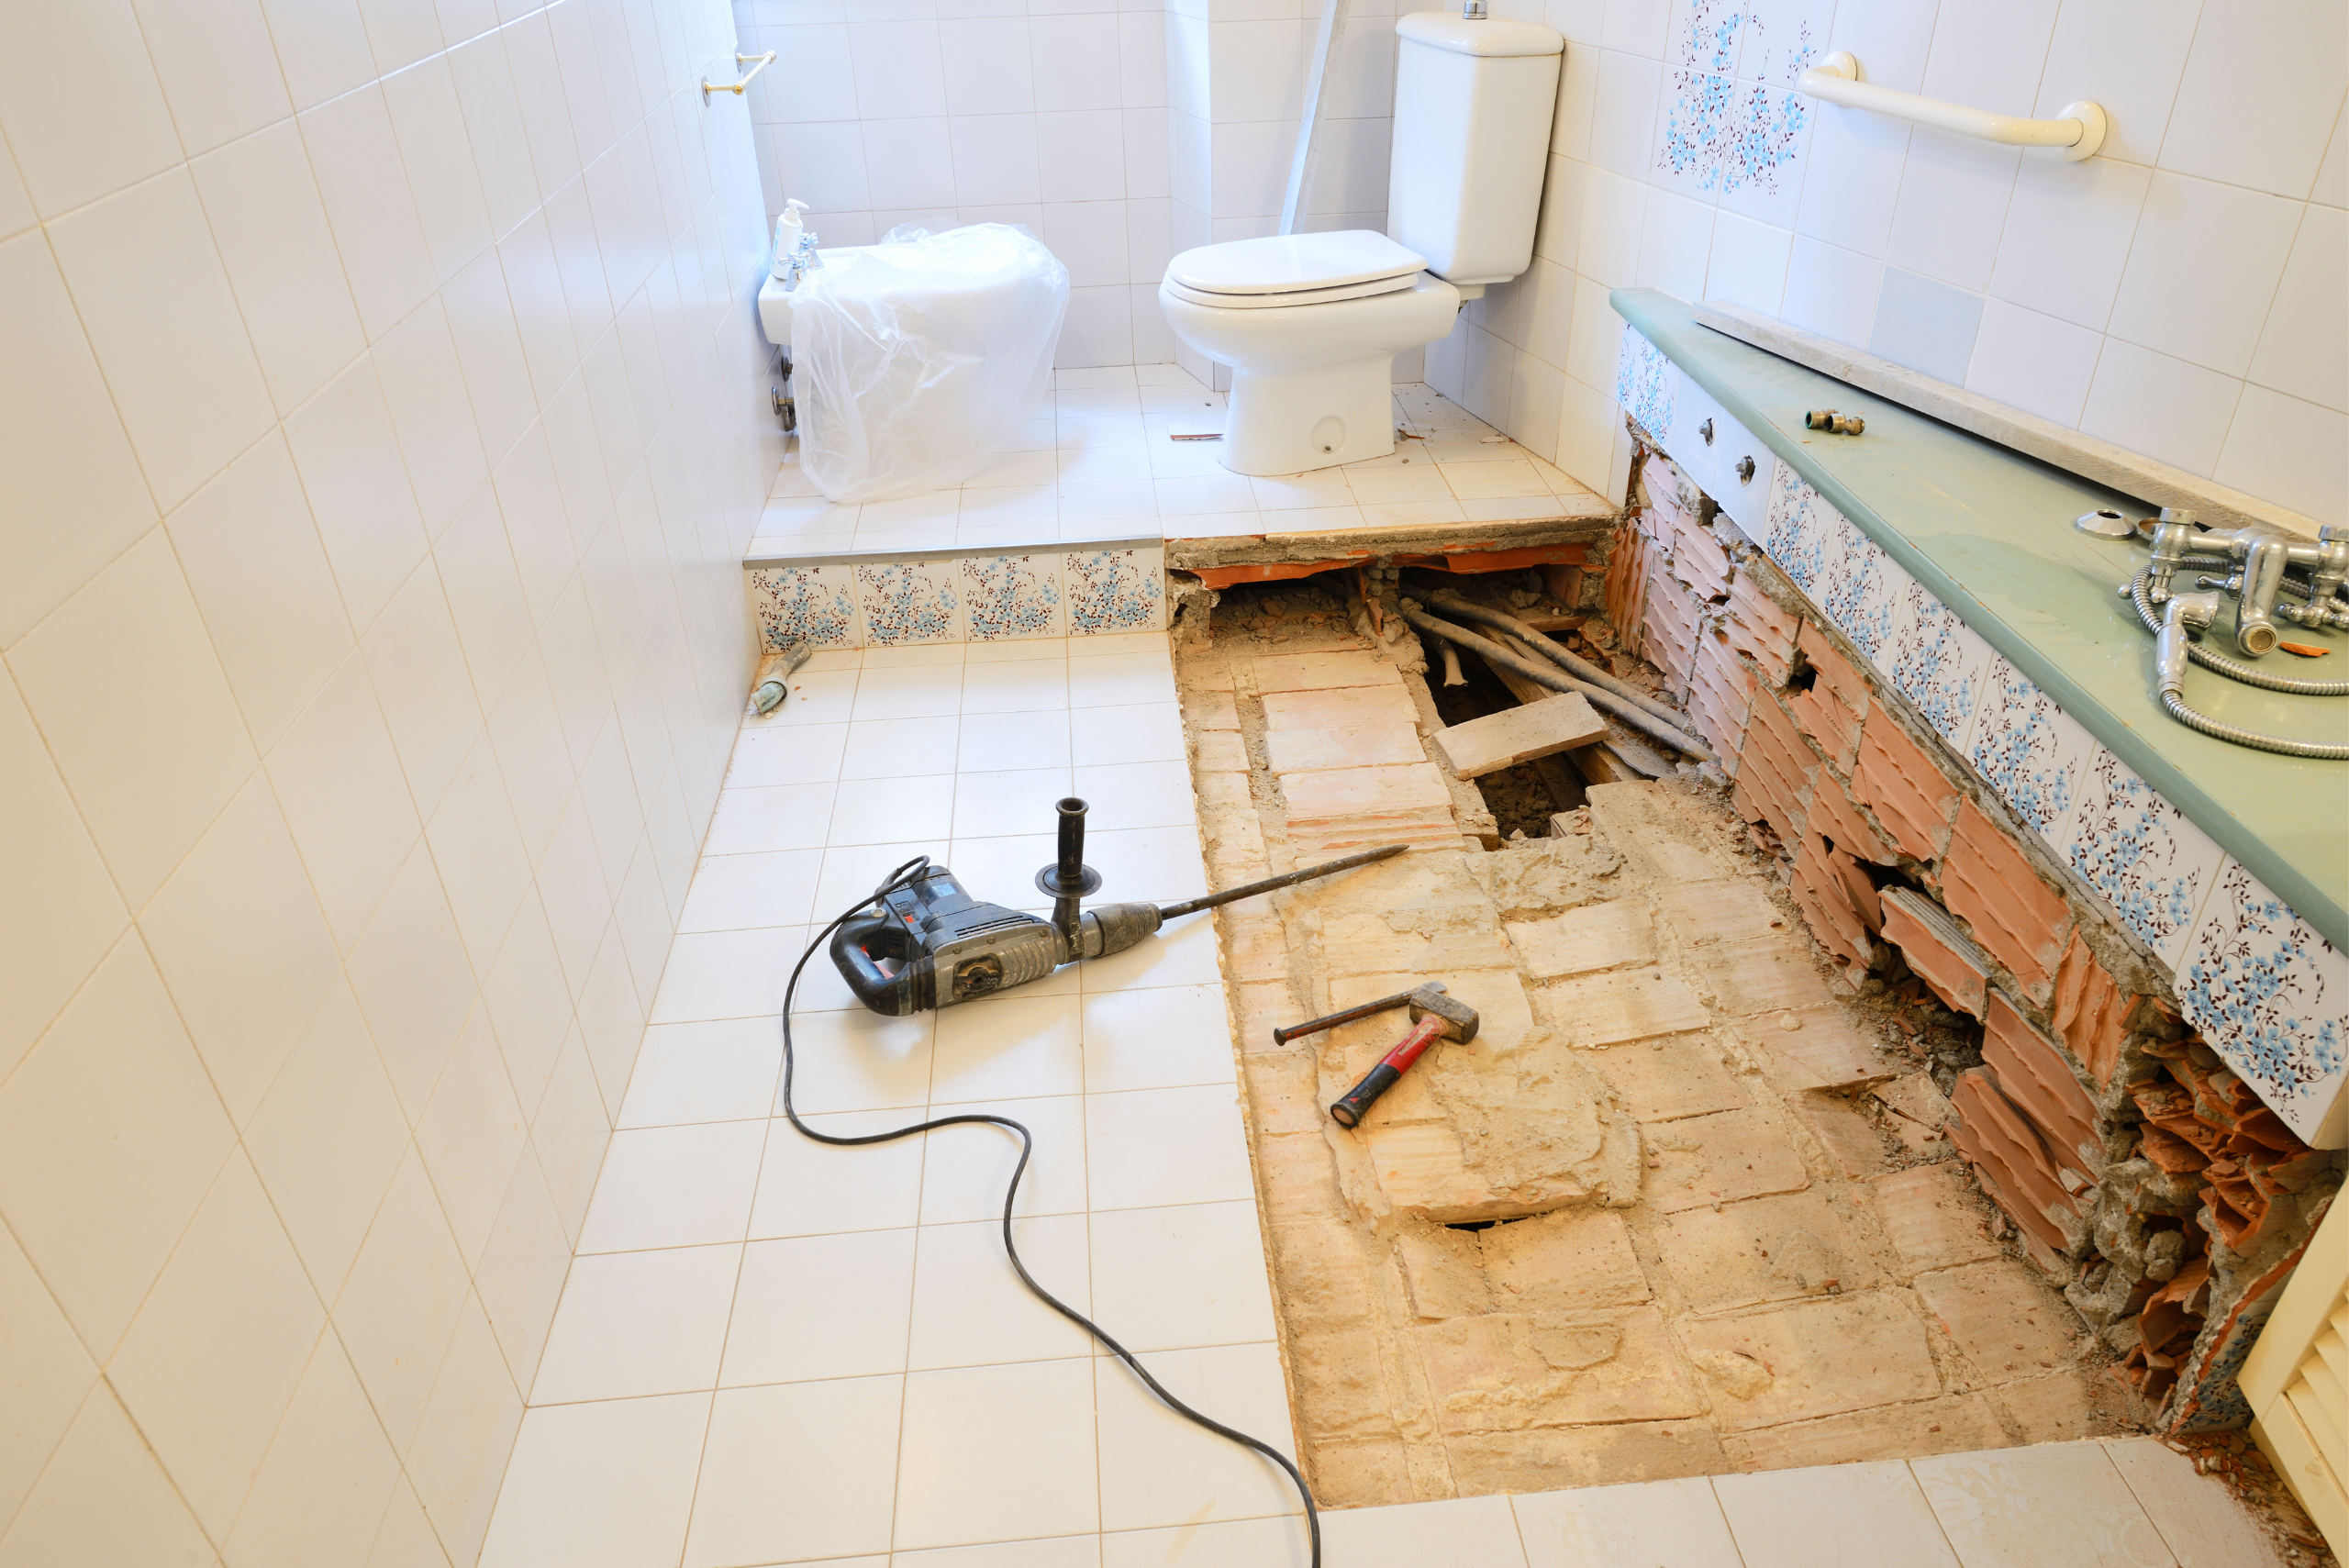 Small bathroom during remodeling.